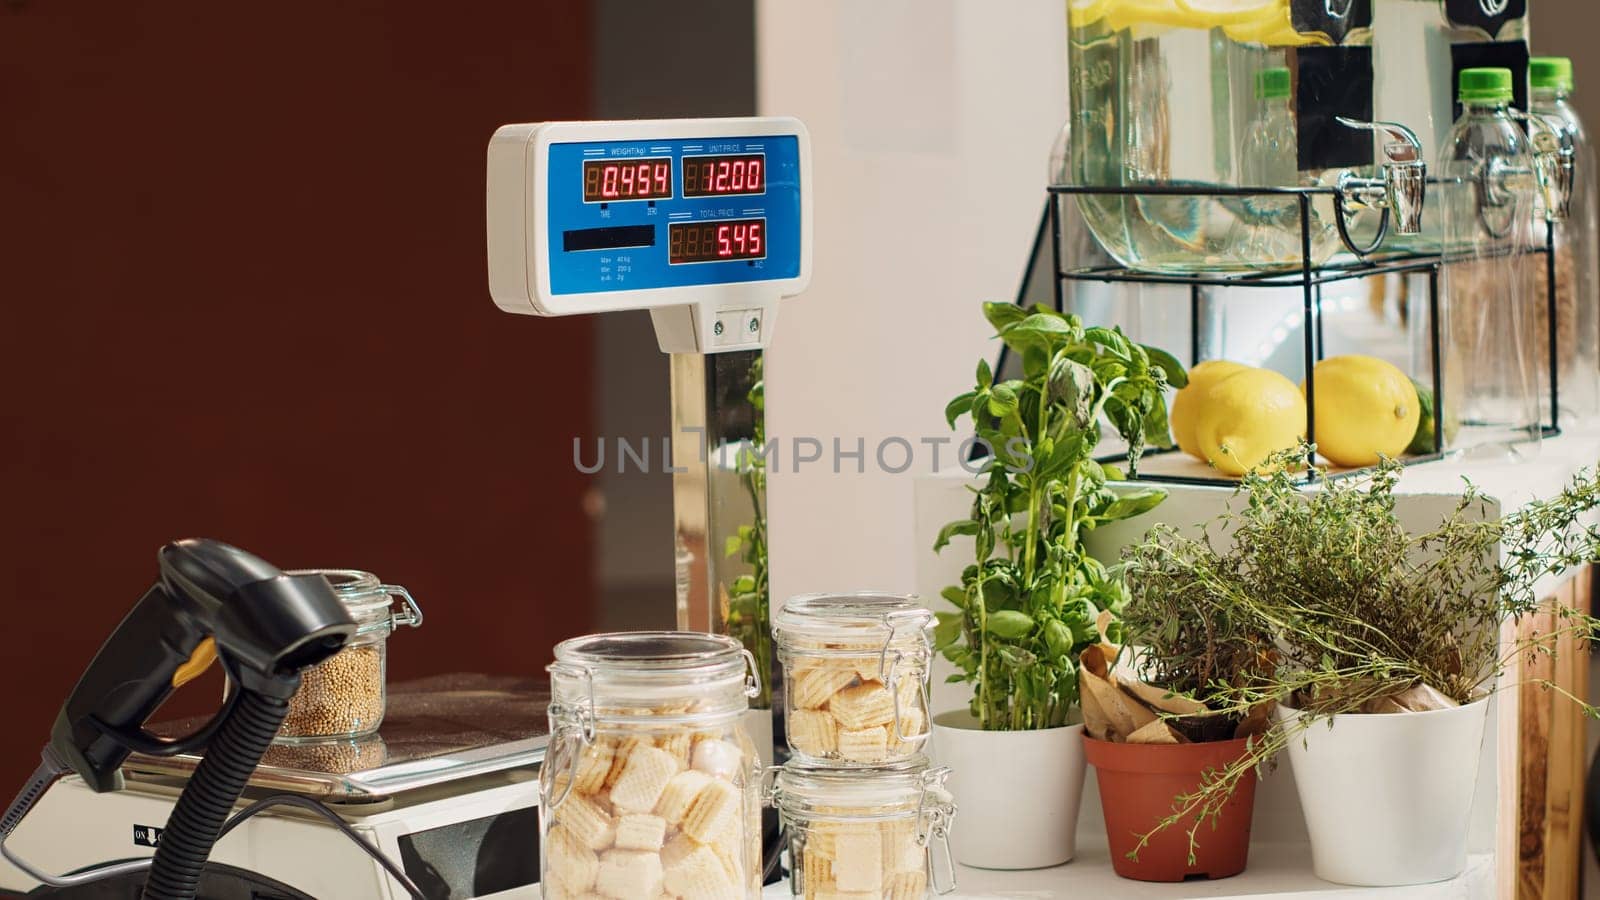 Close up of electronic scale in eco friendly zero waste supermarket next to organic produce. Panning shot of weighing machine in local neighborhood shop used for bulk products